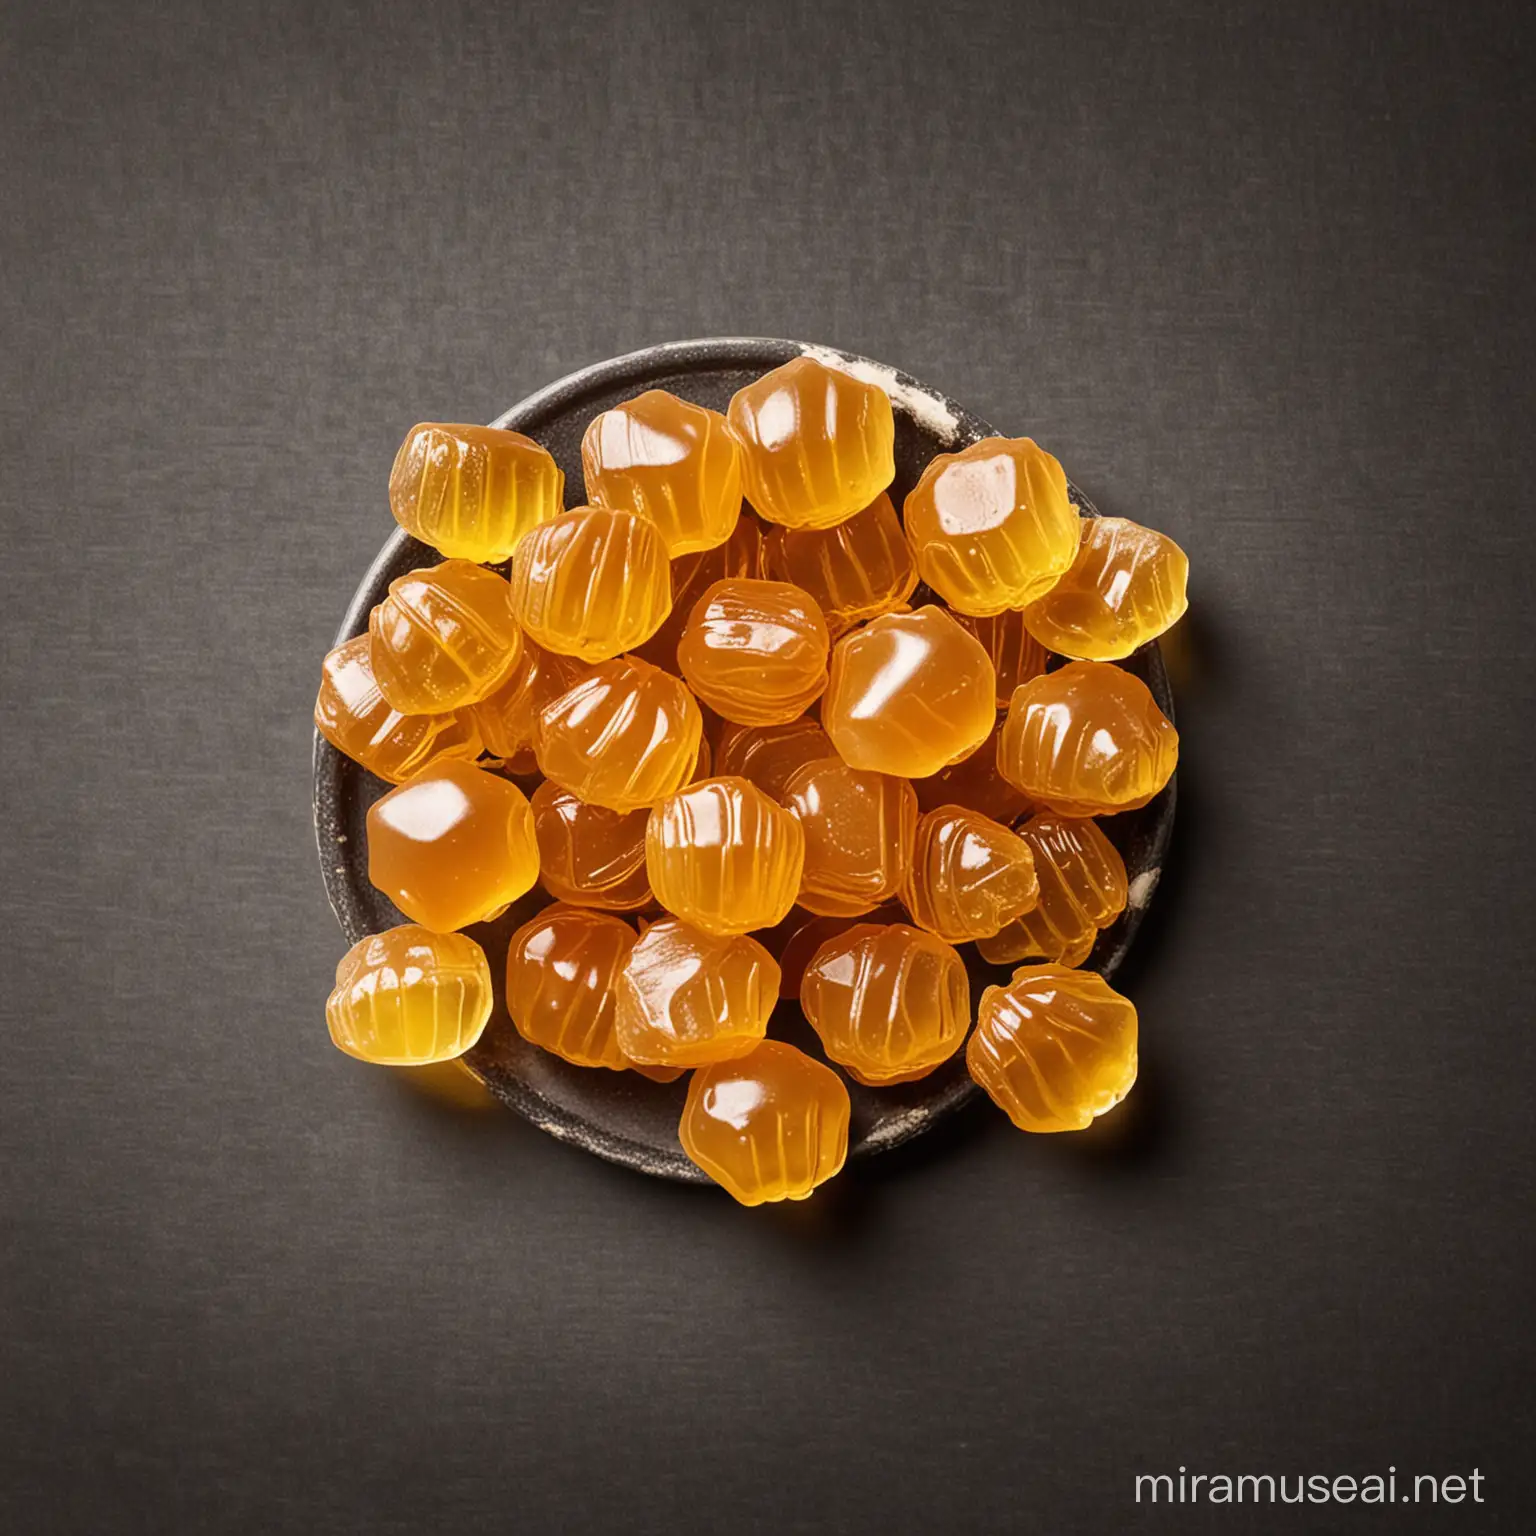 Golden Honey Cough Drops Sweet Relief for a Sore Throat